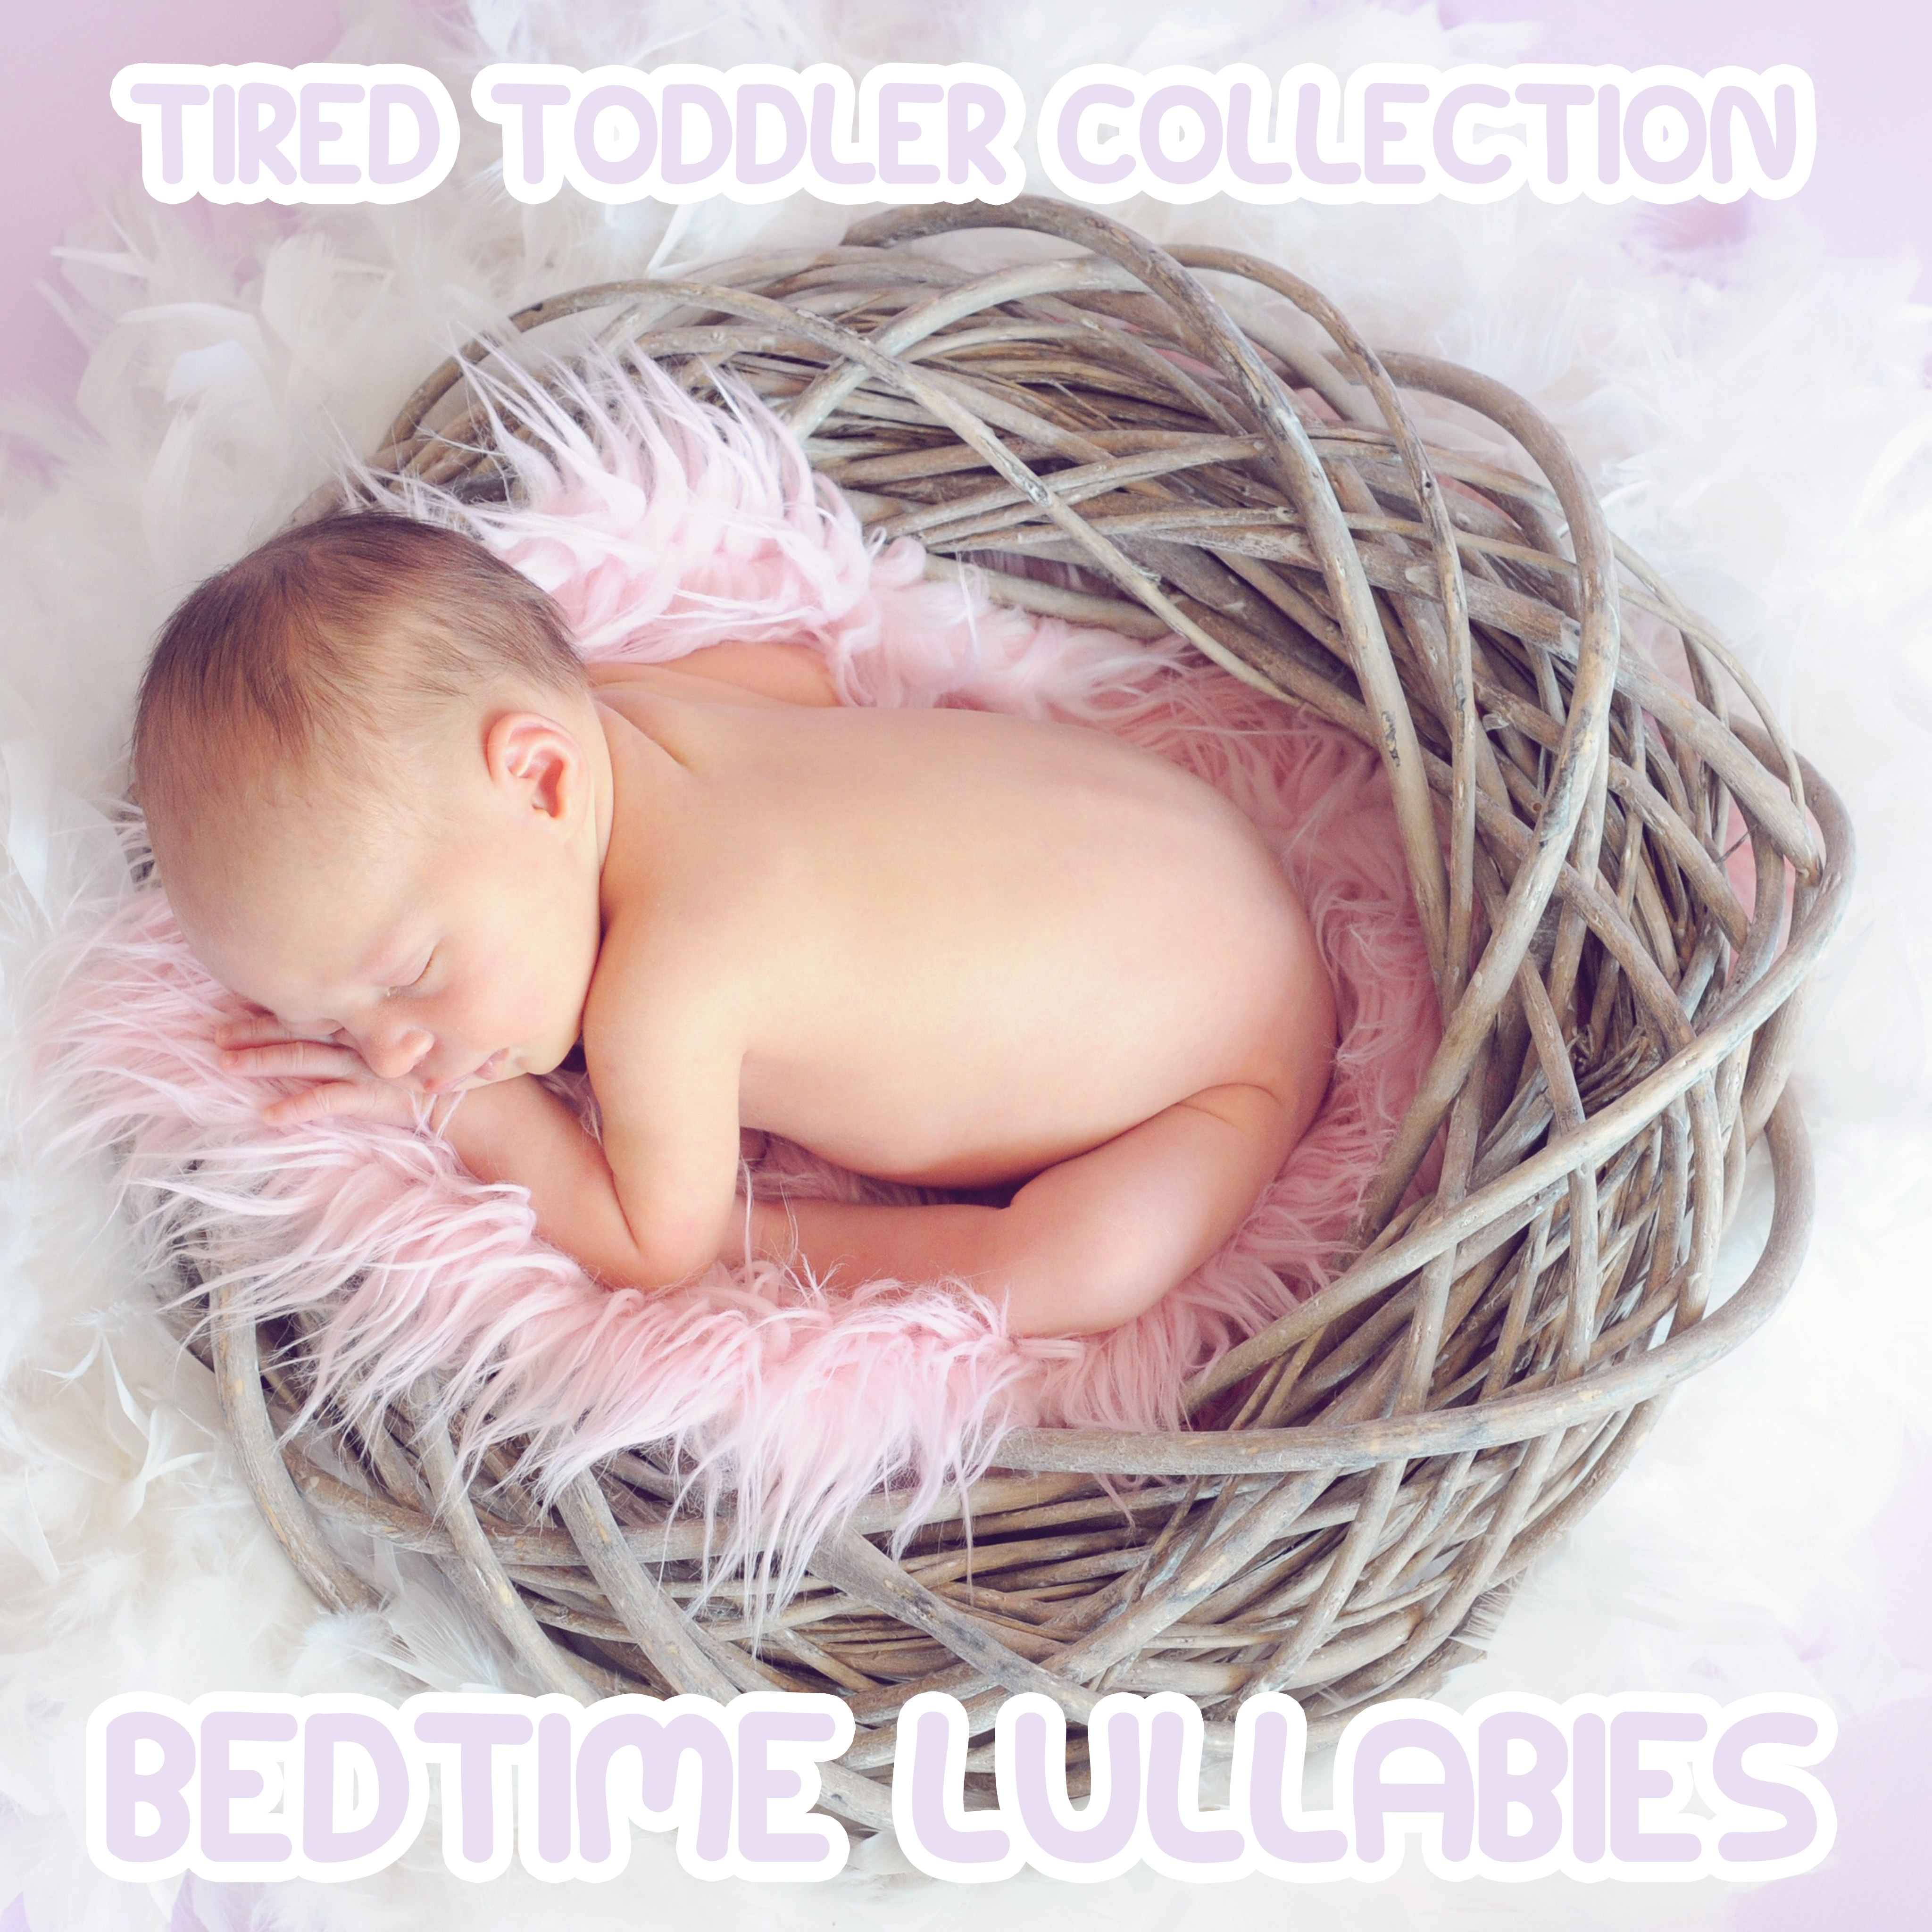 2018 A Tired Toddler Collection: Bedtime Lullabies